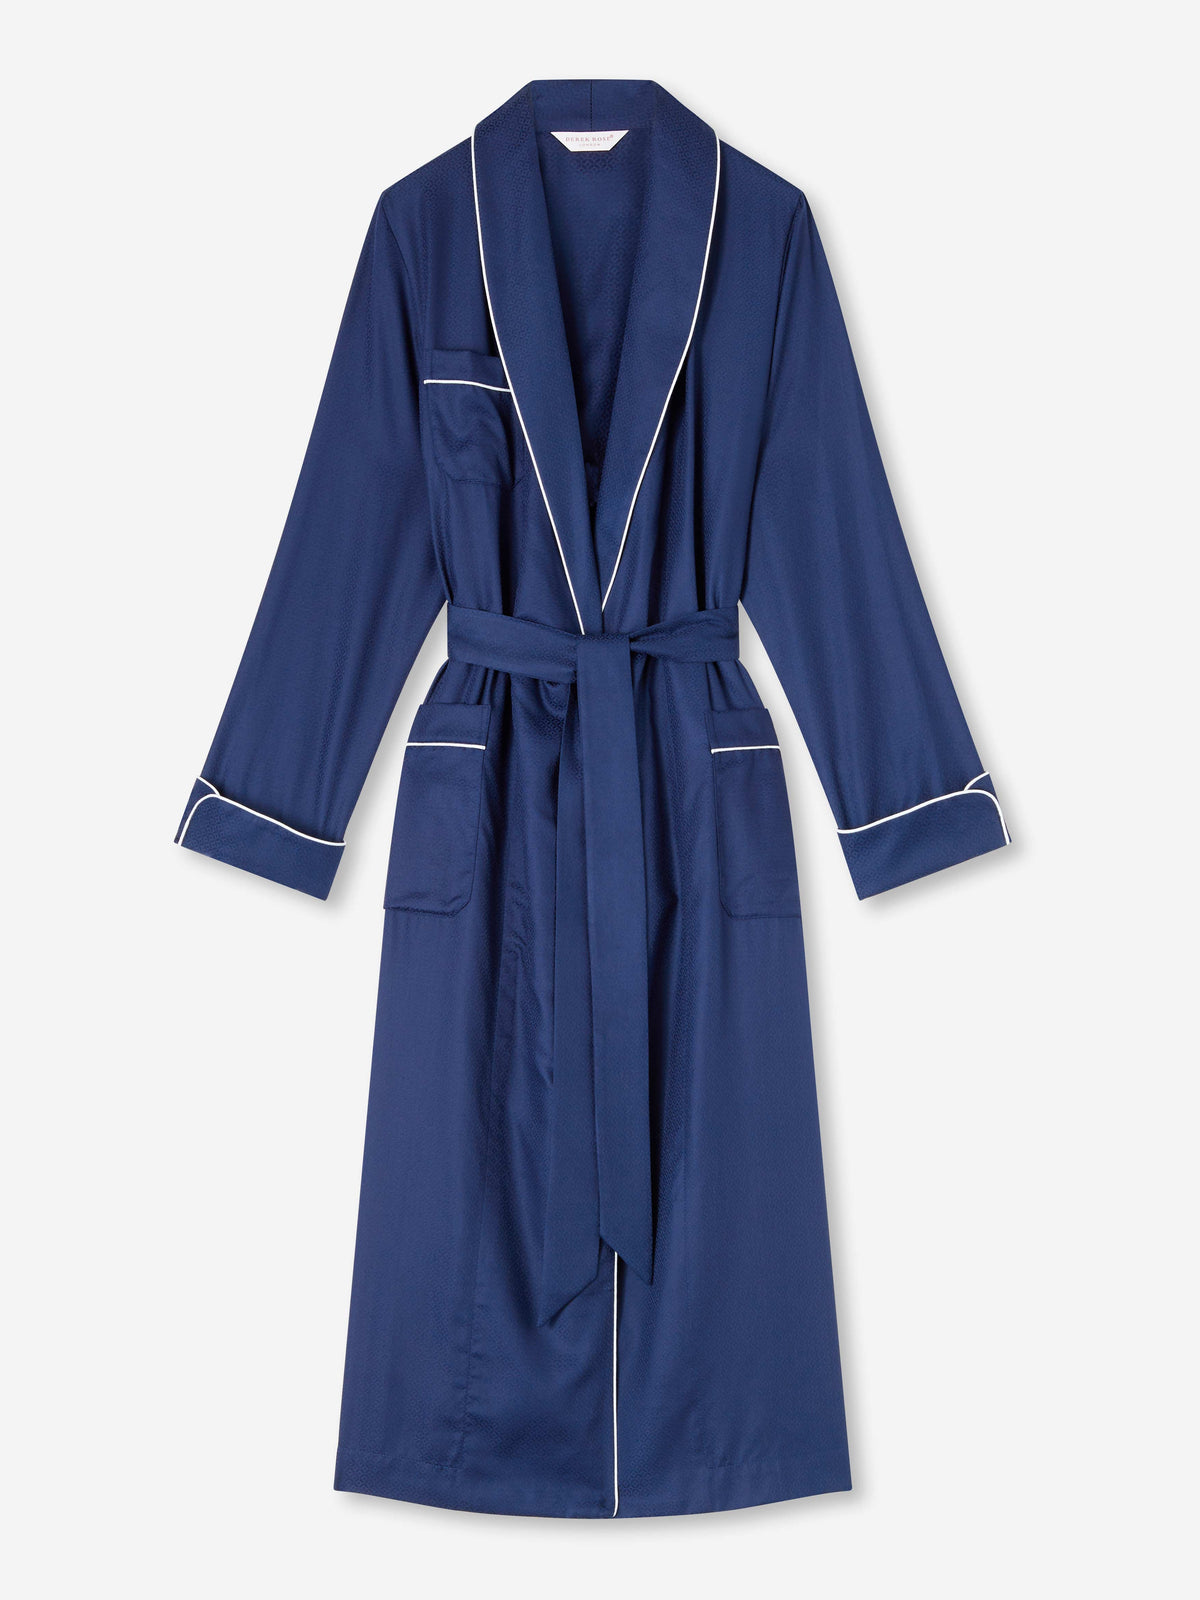 Women's Long Dressing Gown Lombard 6 Cotton Jacquard Navy